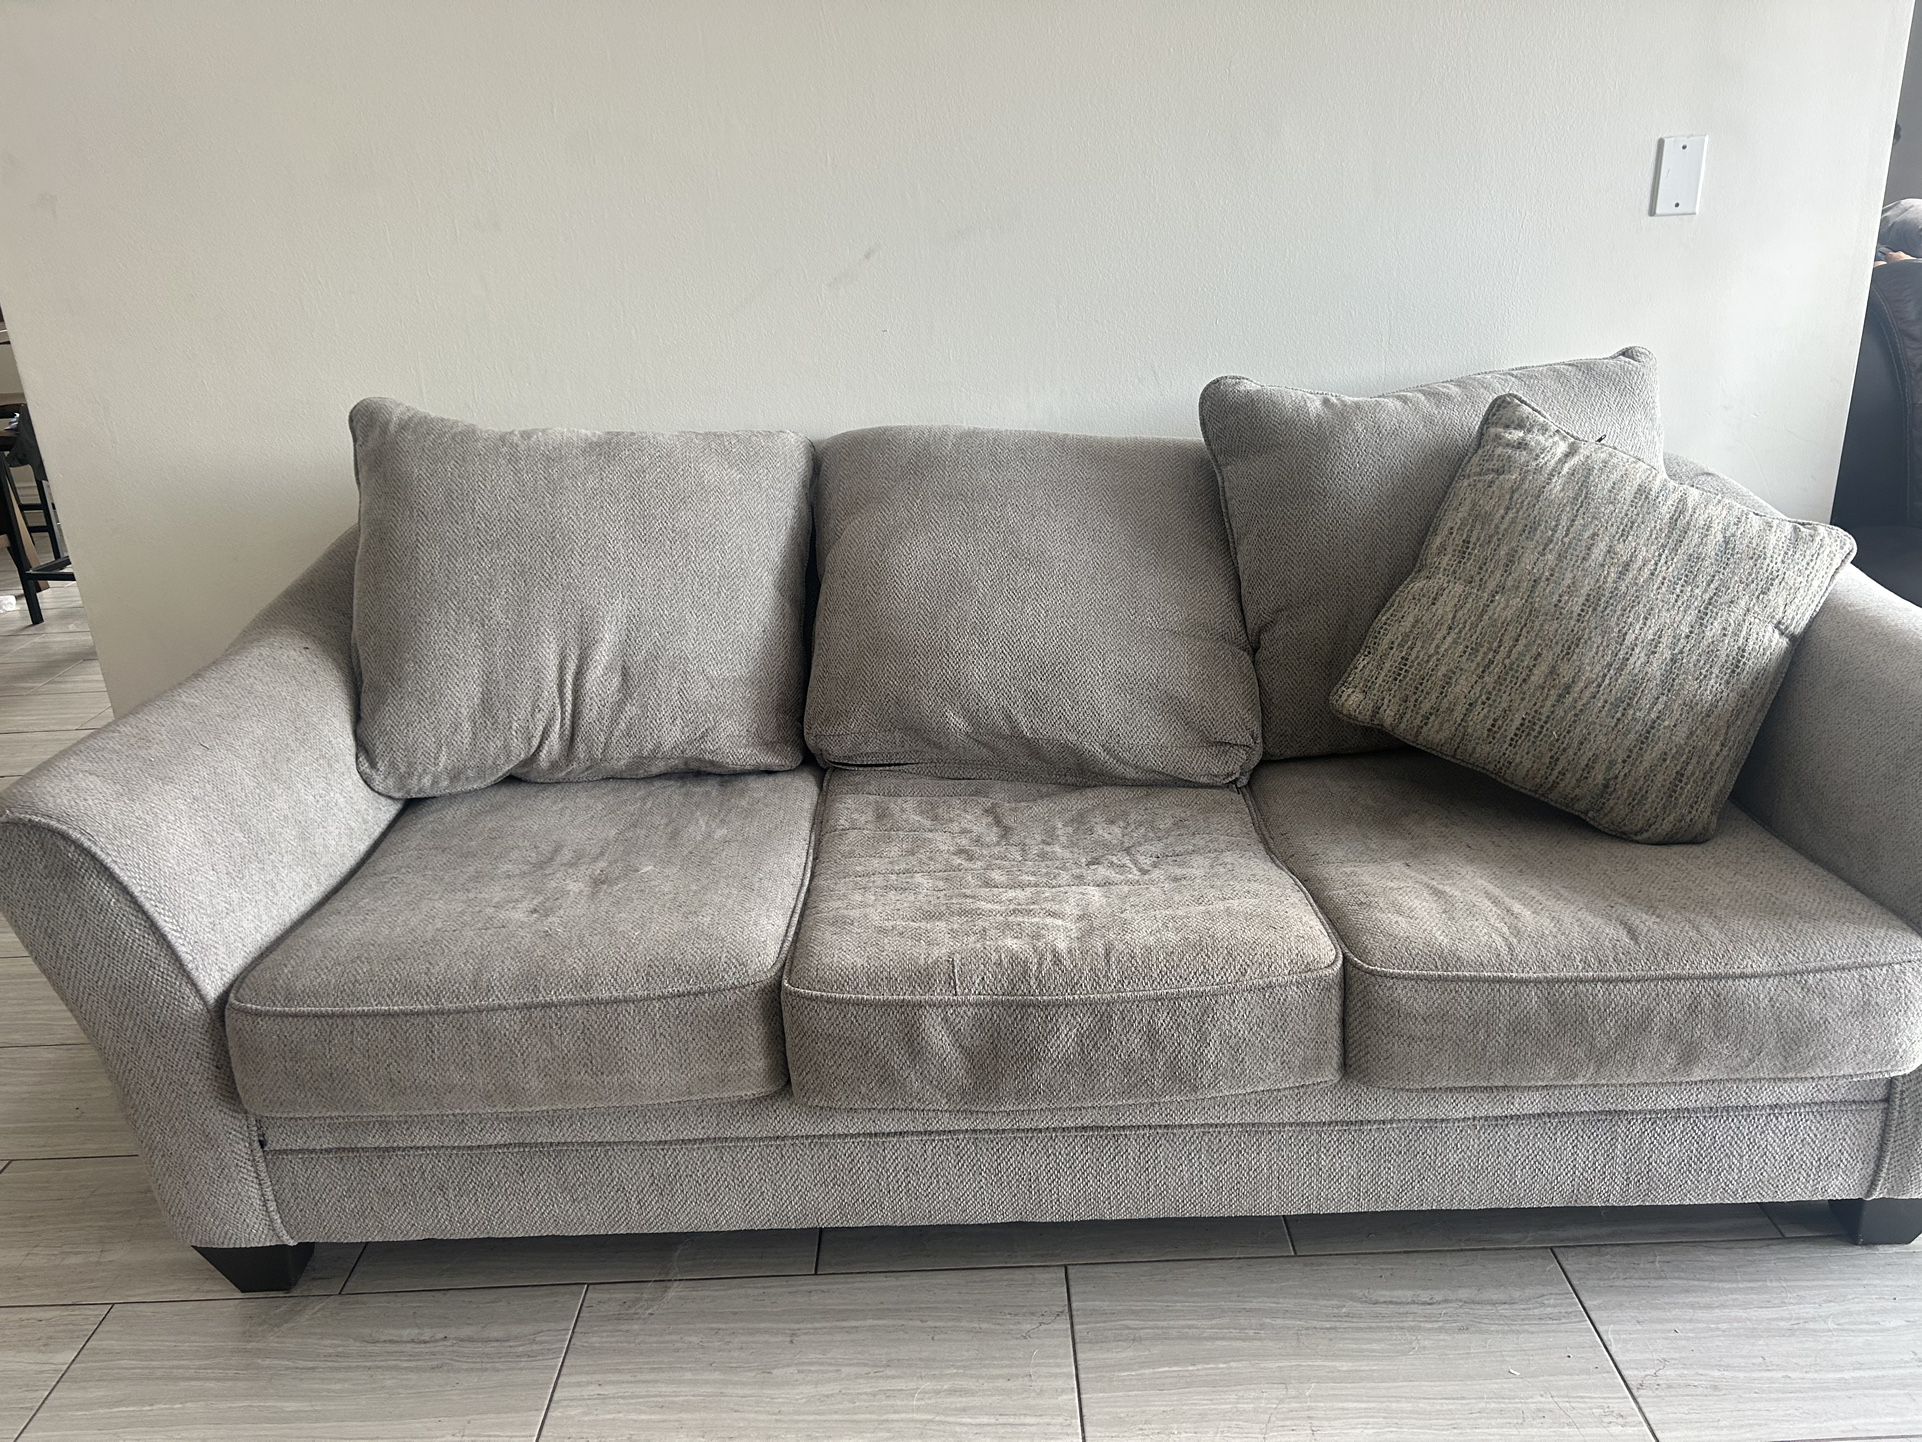 Loveseat And A Pull Out Sofa Bed 